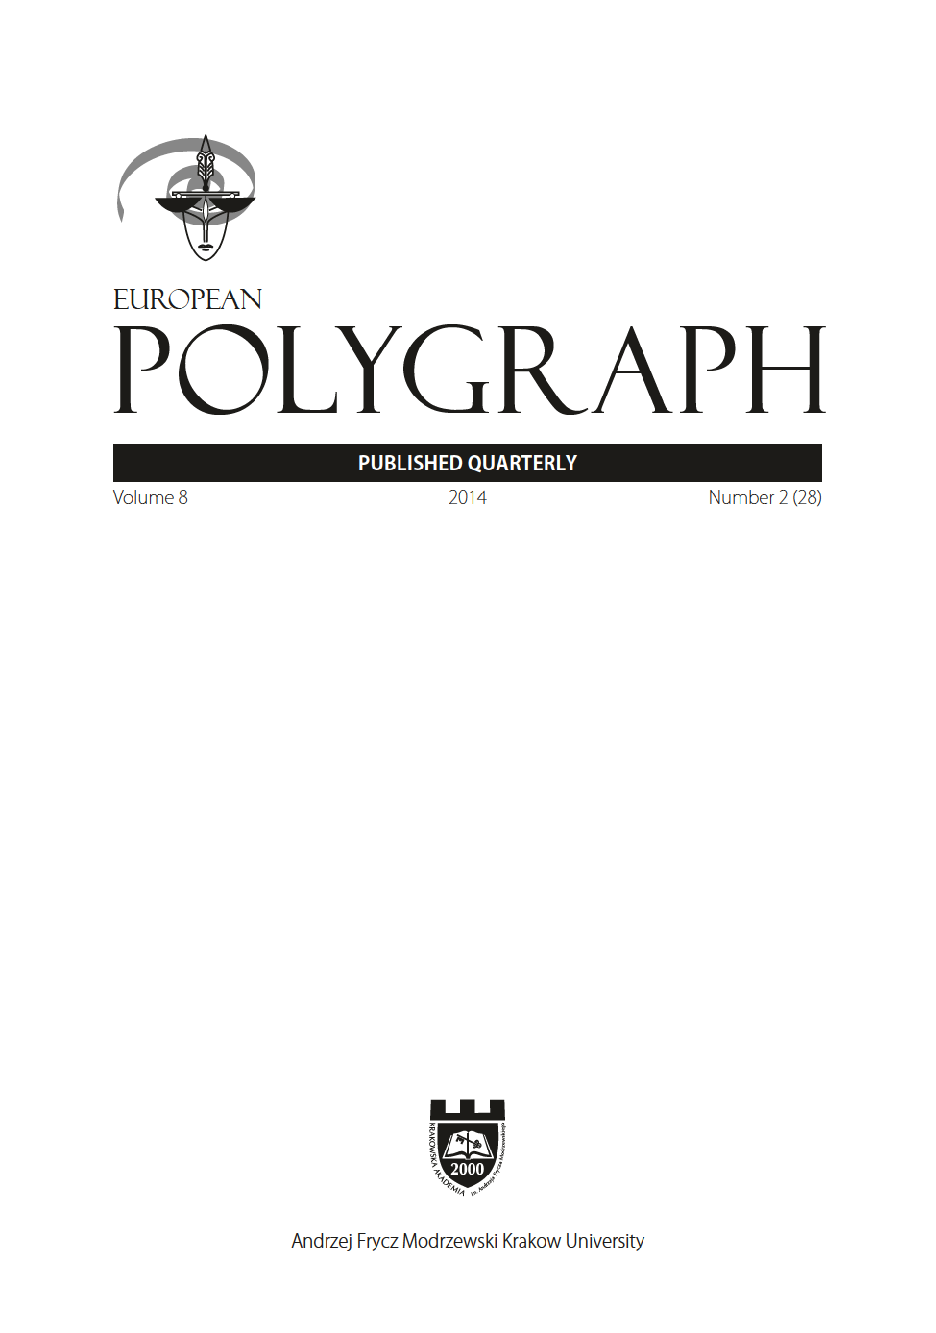 Results of Polygraph Examinations: Direct or Circumstantial Evidence?